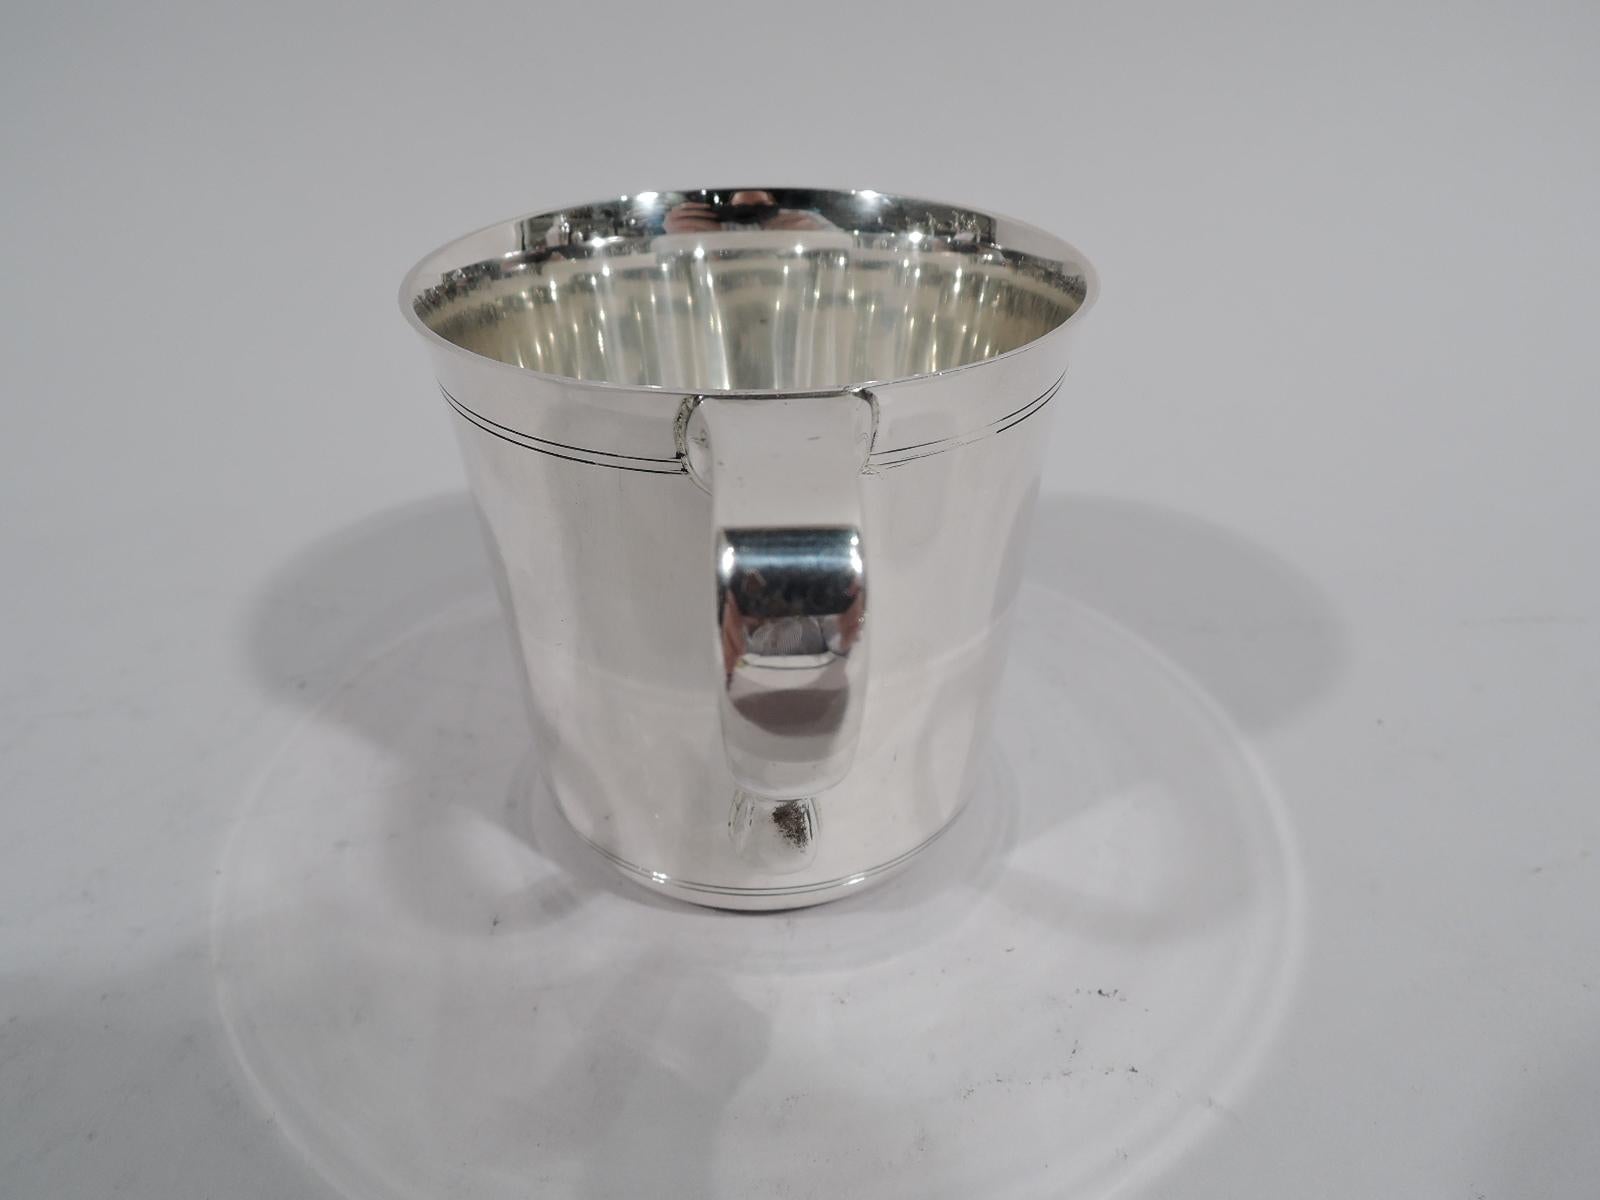 Art Deco sterling silver baby cup. Made by Tiffany & Co. in New York, ca 1941. Straight sides with flared rim and scroll bracket handle. Engraved double line borders at top and bottom leave plenty of room for a big-hearted presentation. Fully marked